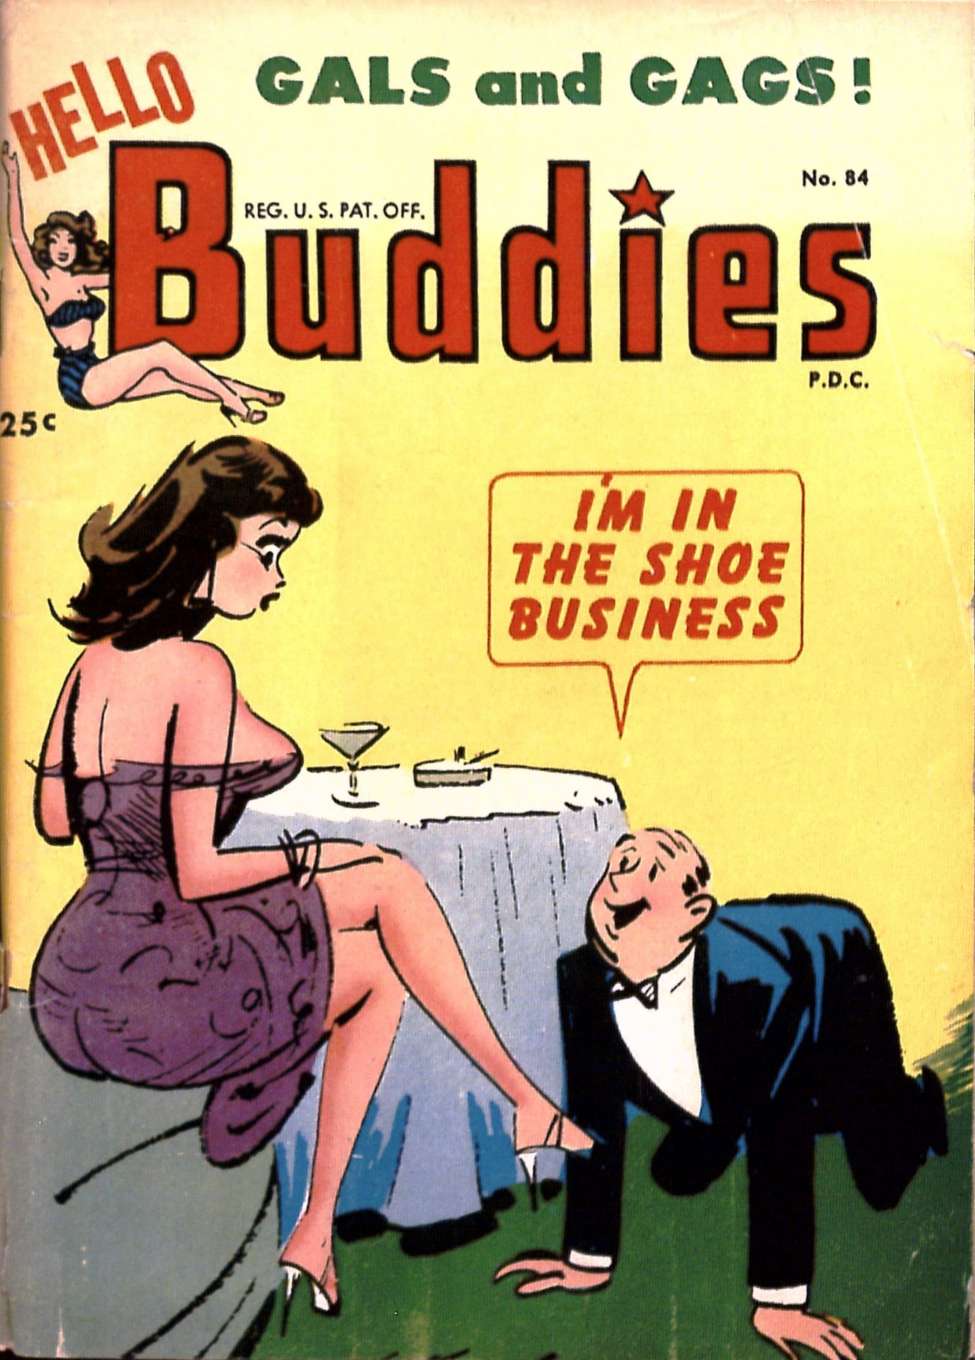 Book Cover For Hello Buddies 84